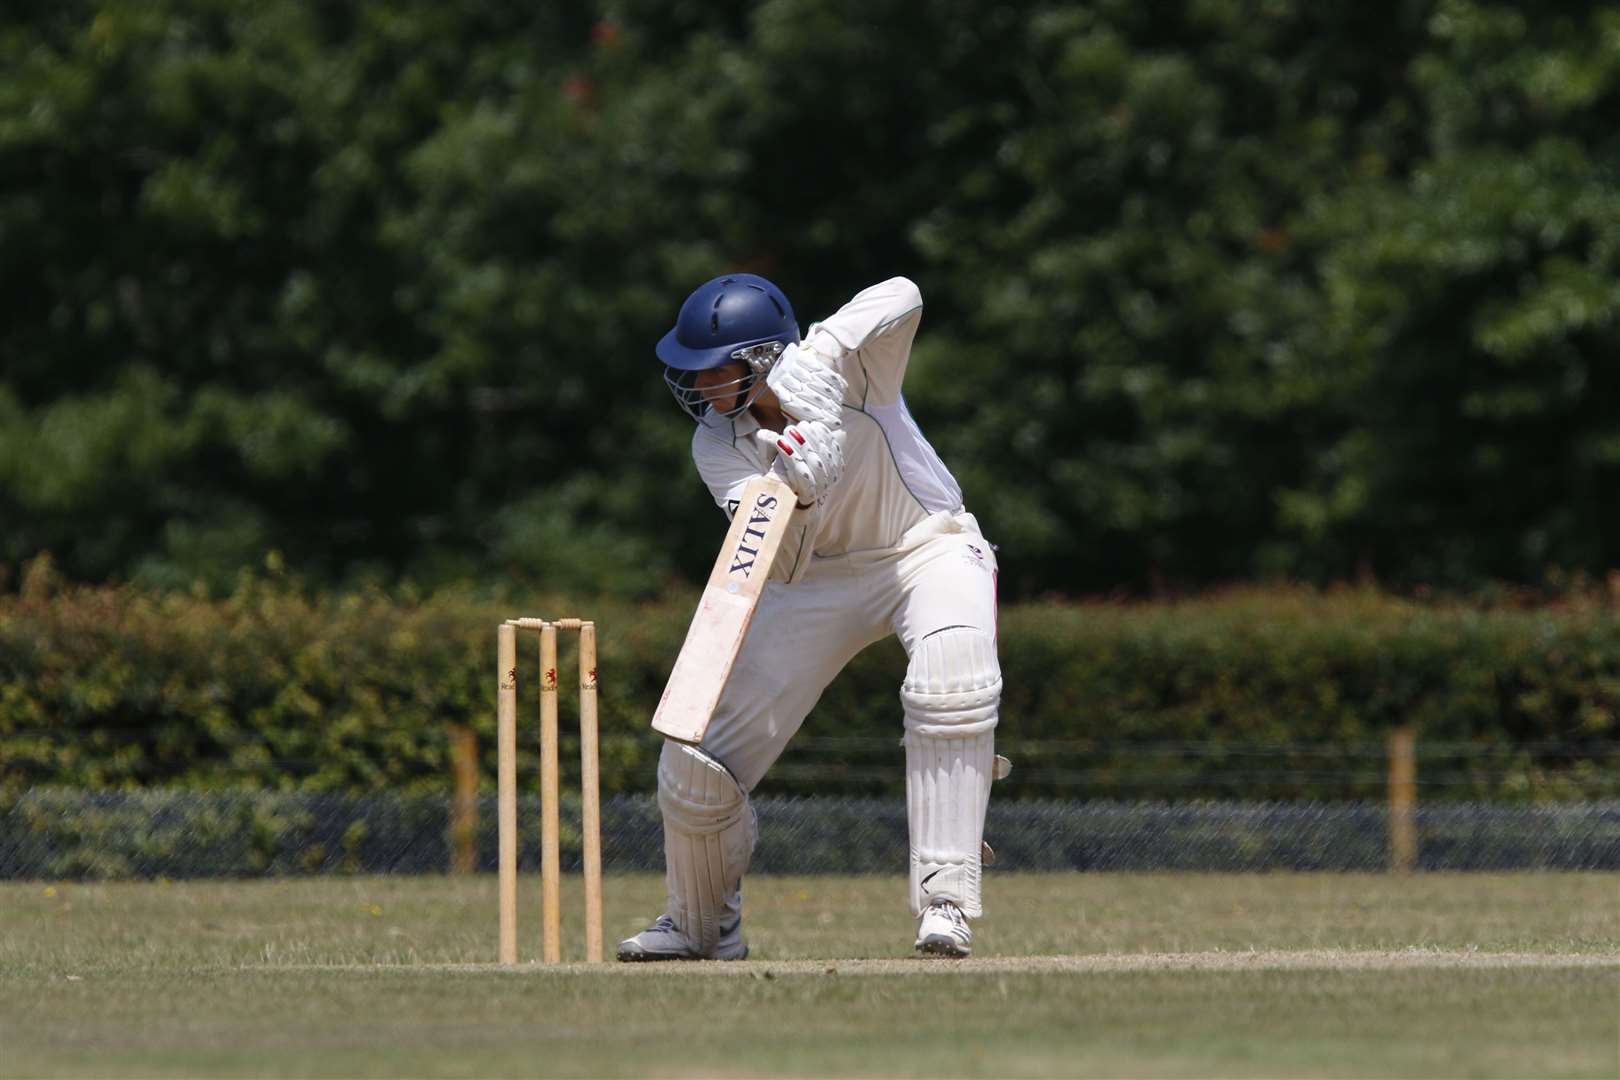 Leeds & Broomfield's George Davis impressed in the field and with the bat Picture: Andy Jones